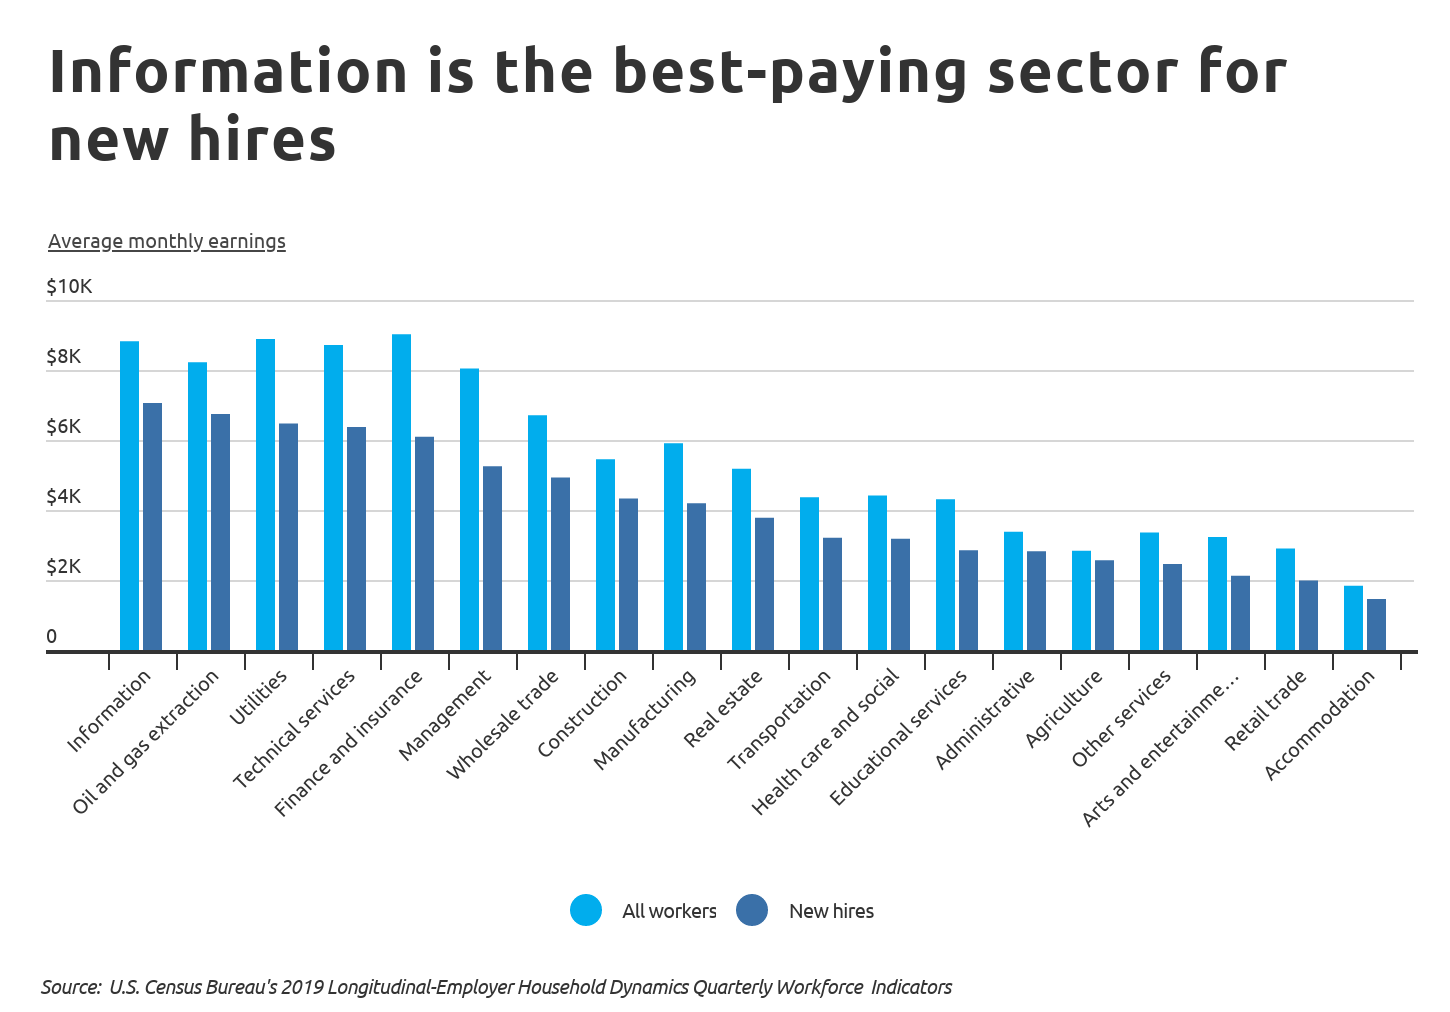 Information is the best-paying sector for new hires